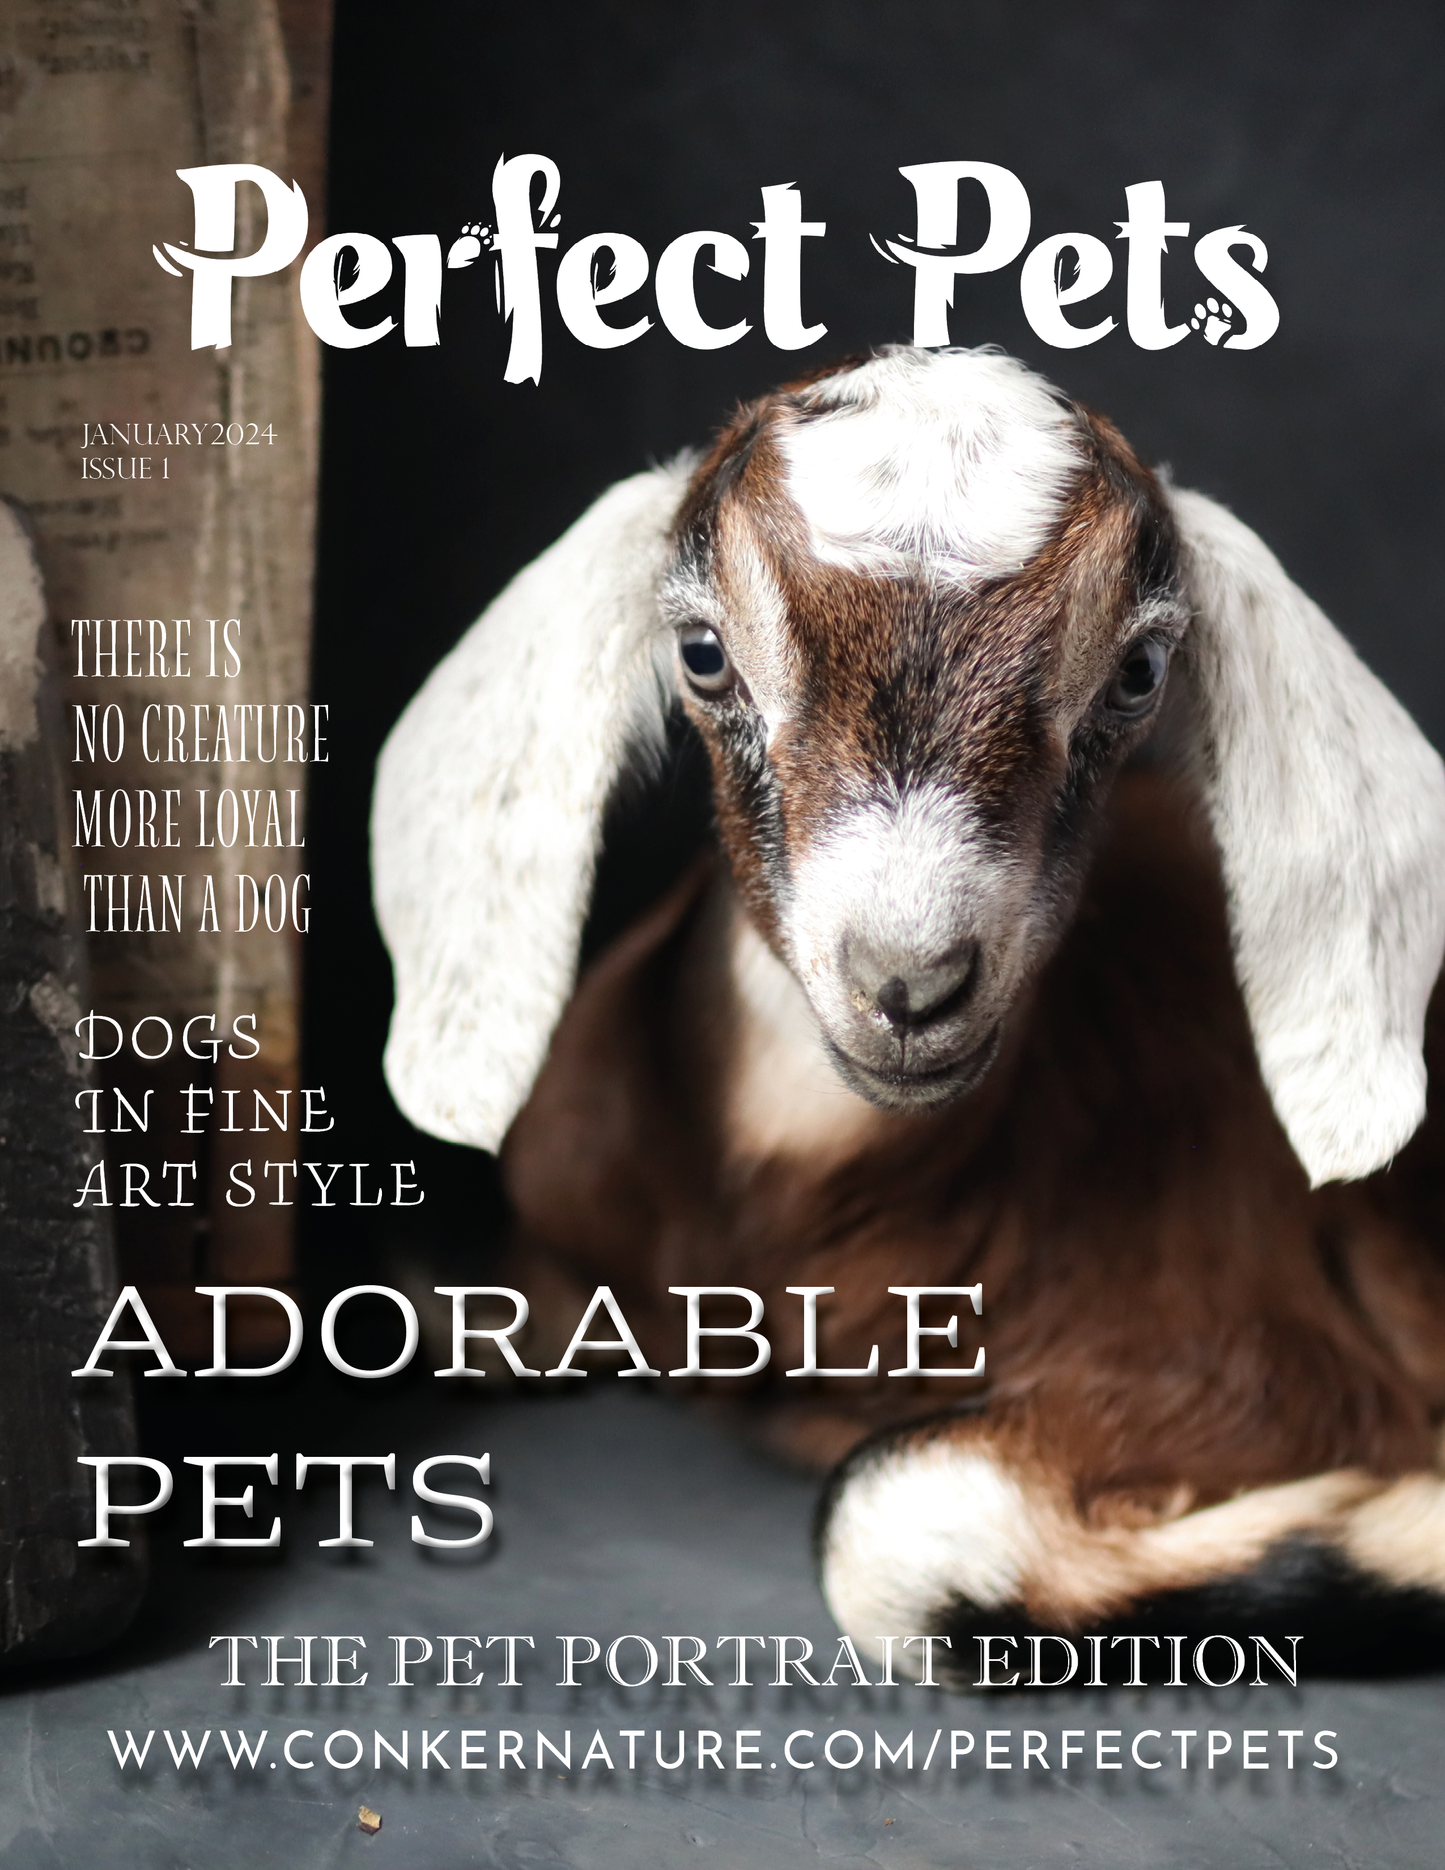 Perfect Pets Magazine - January 2024 Issue 3: The Pet Portrait Edition Issue 1